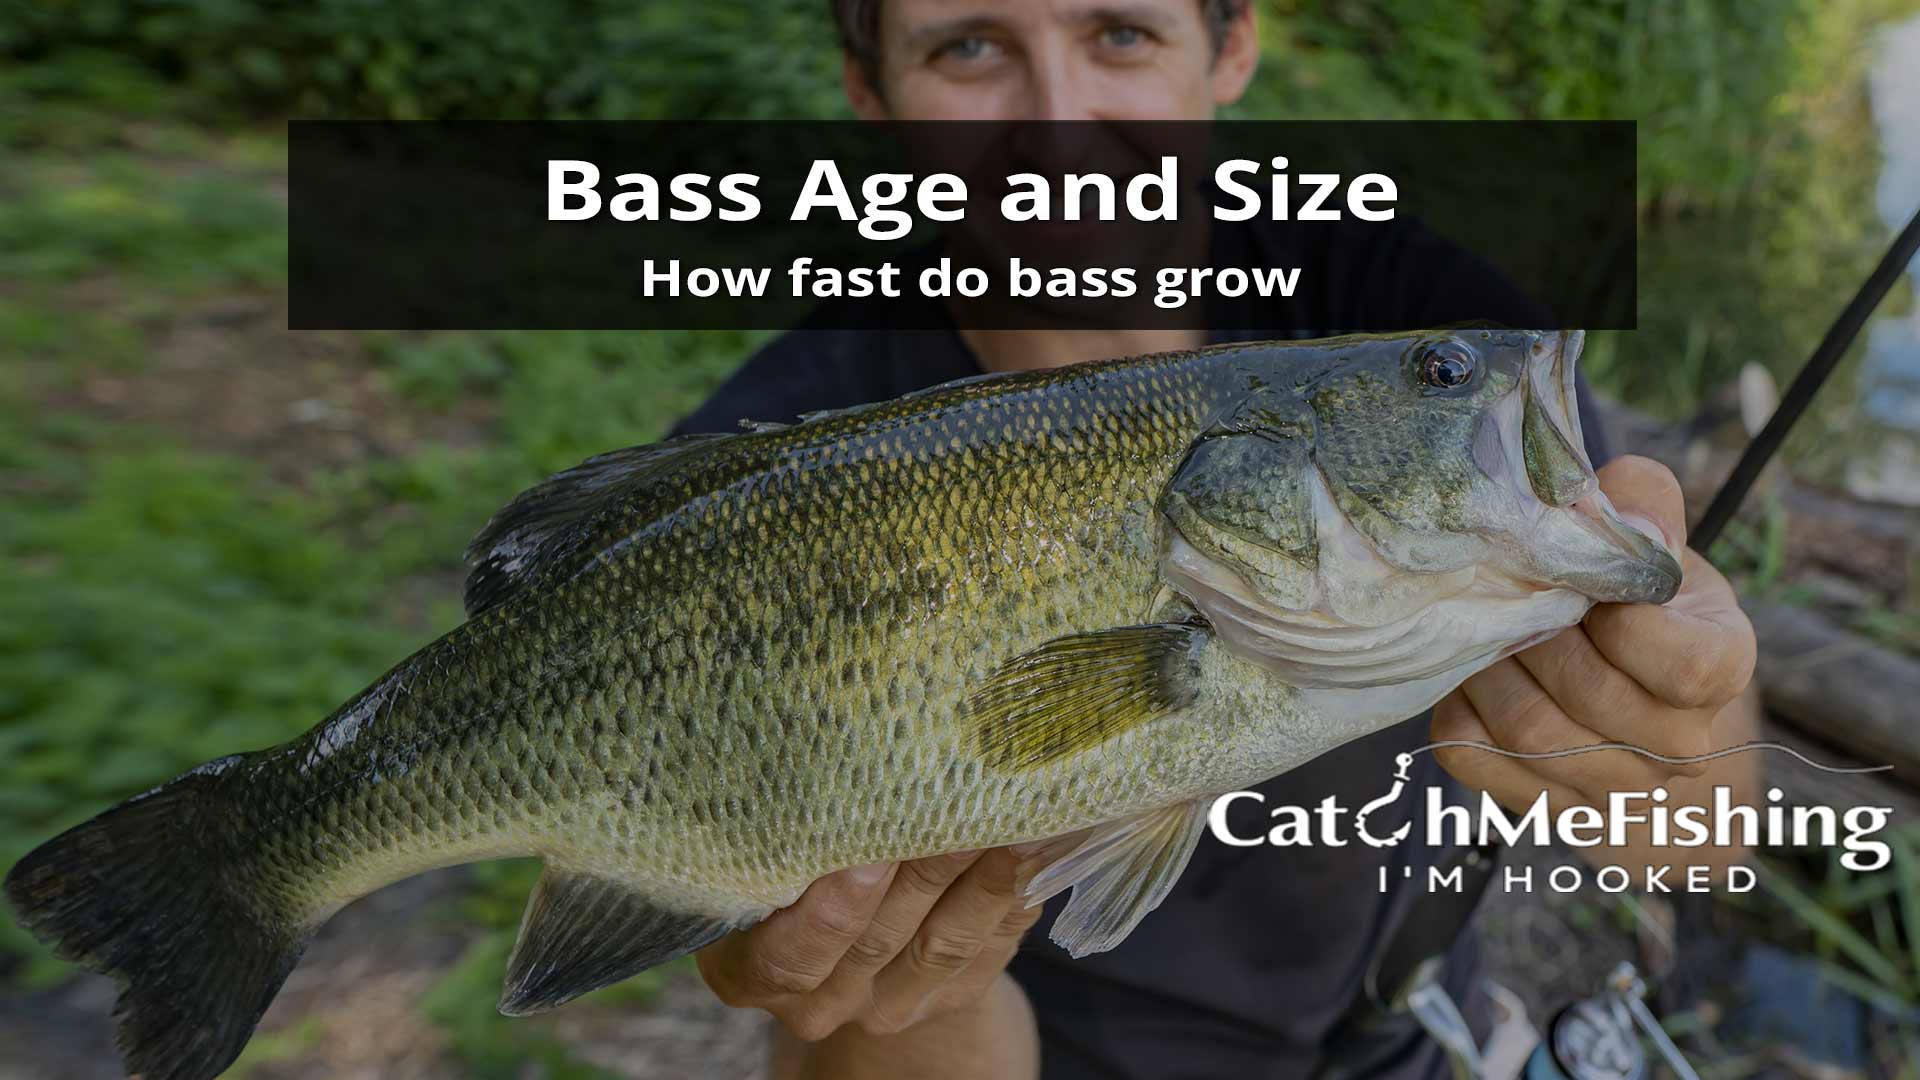 Bass Age and Size: How Fast do Bass Grow - CatchMeFishing